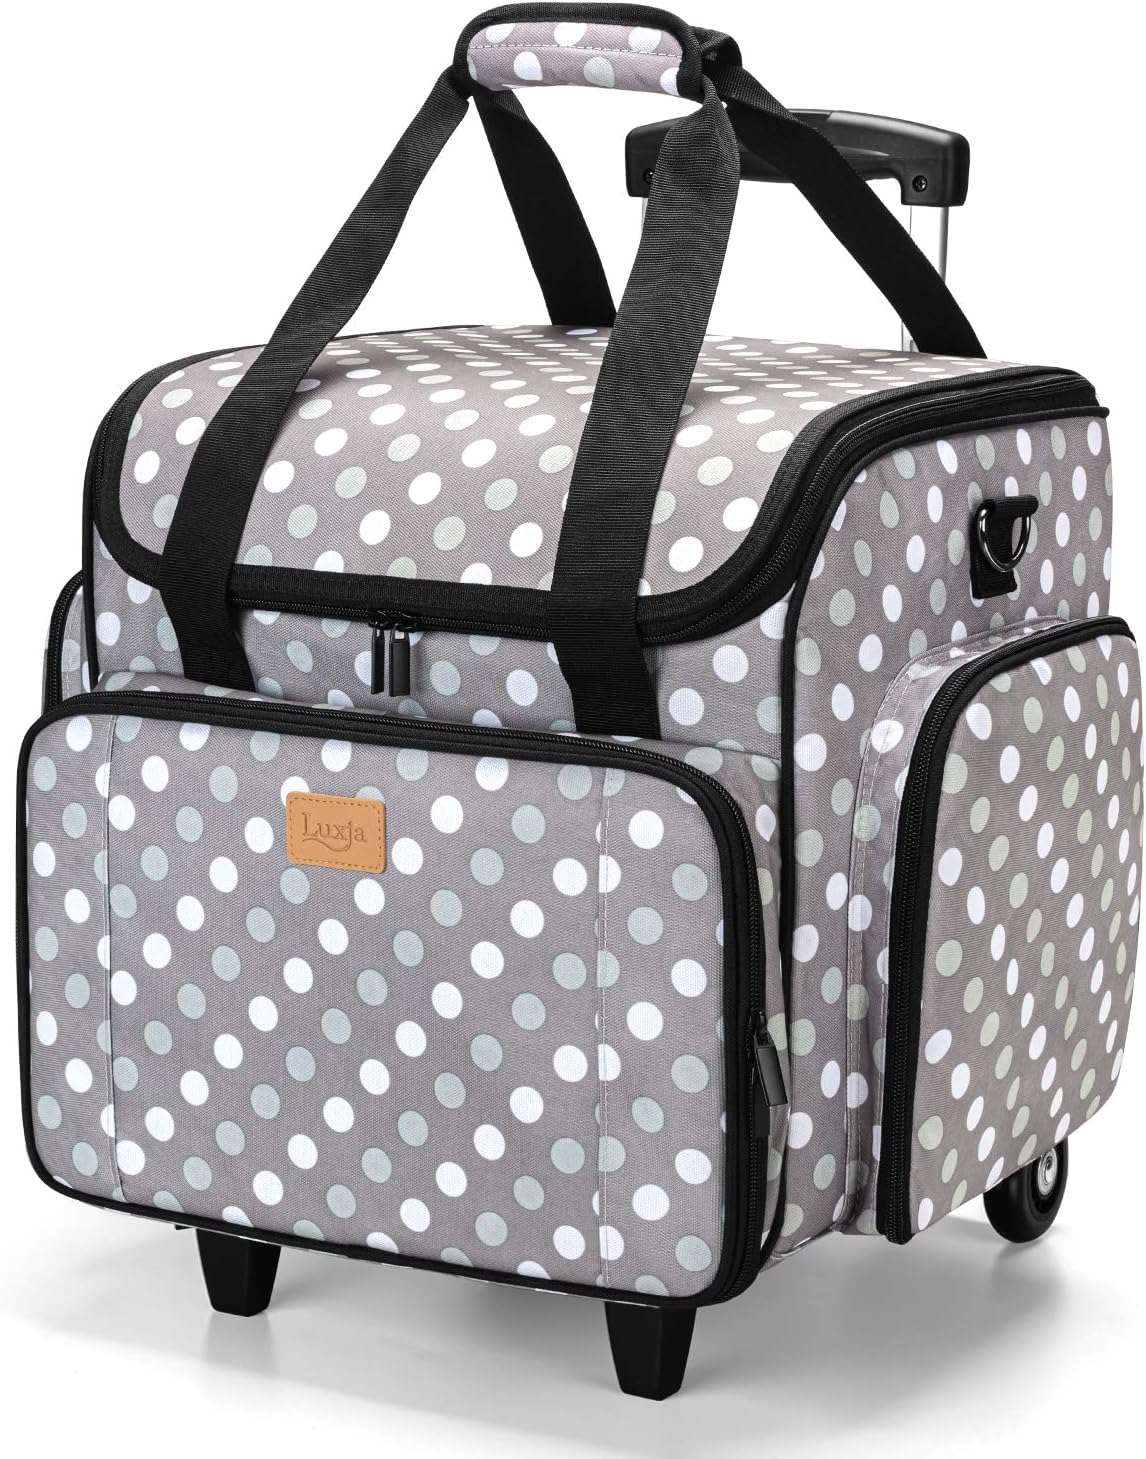 LUXJA Sewing Machine Case with Detachable Dolly, Sewing Machine Tote with Removable Bottom Pad (Patent Design), Gray Dots